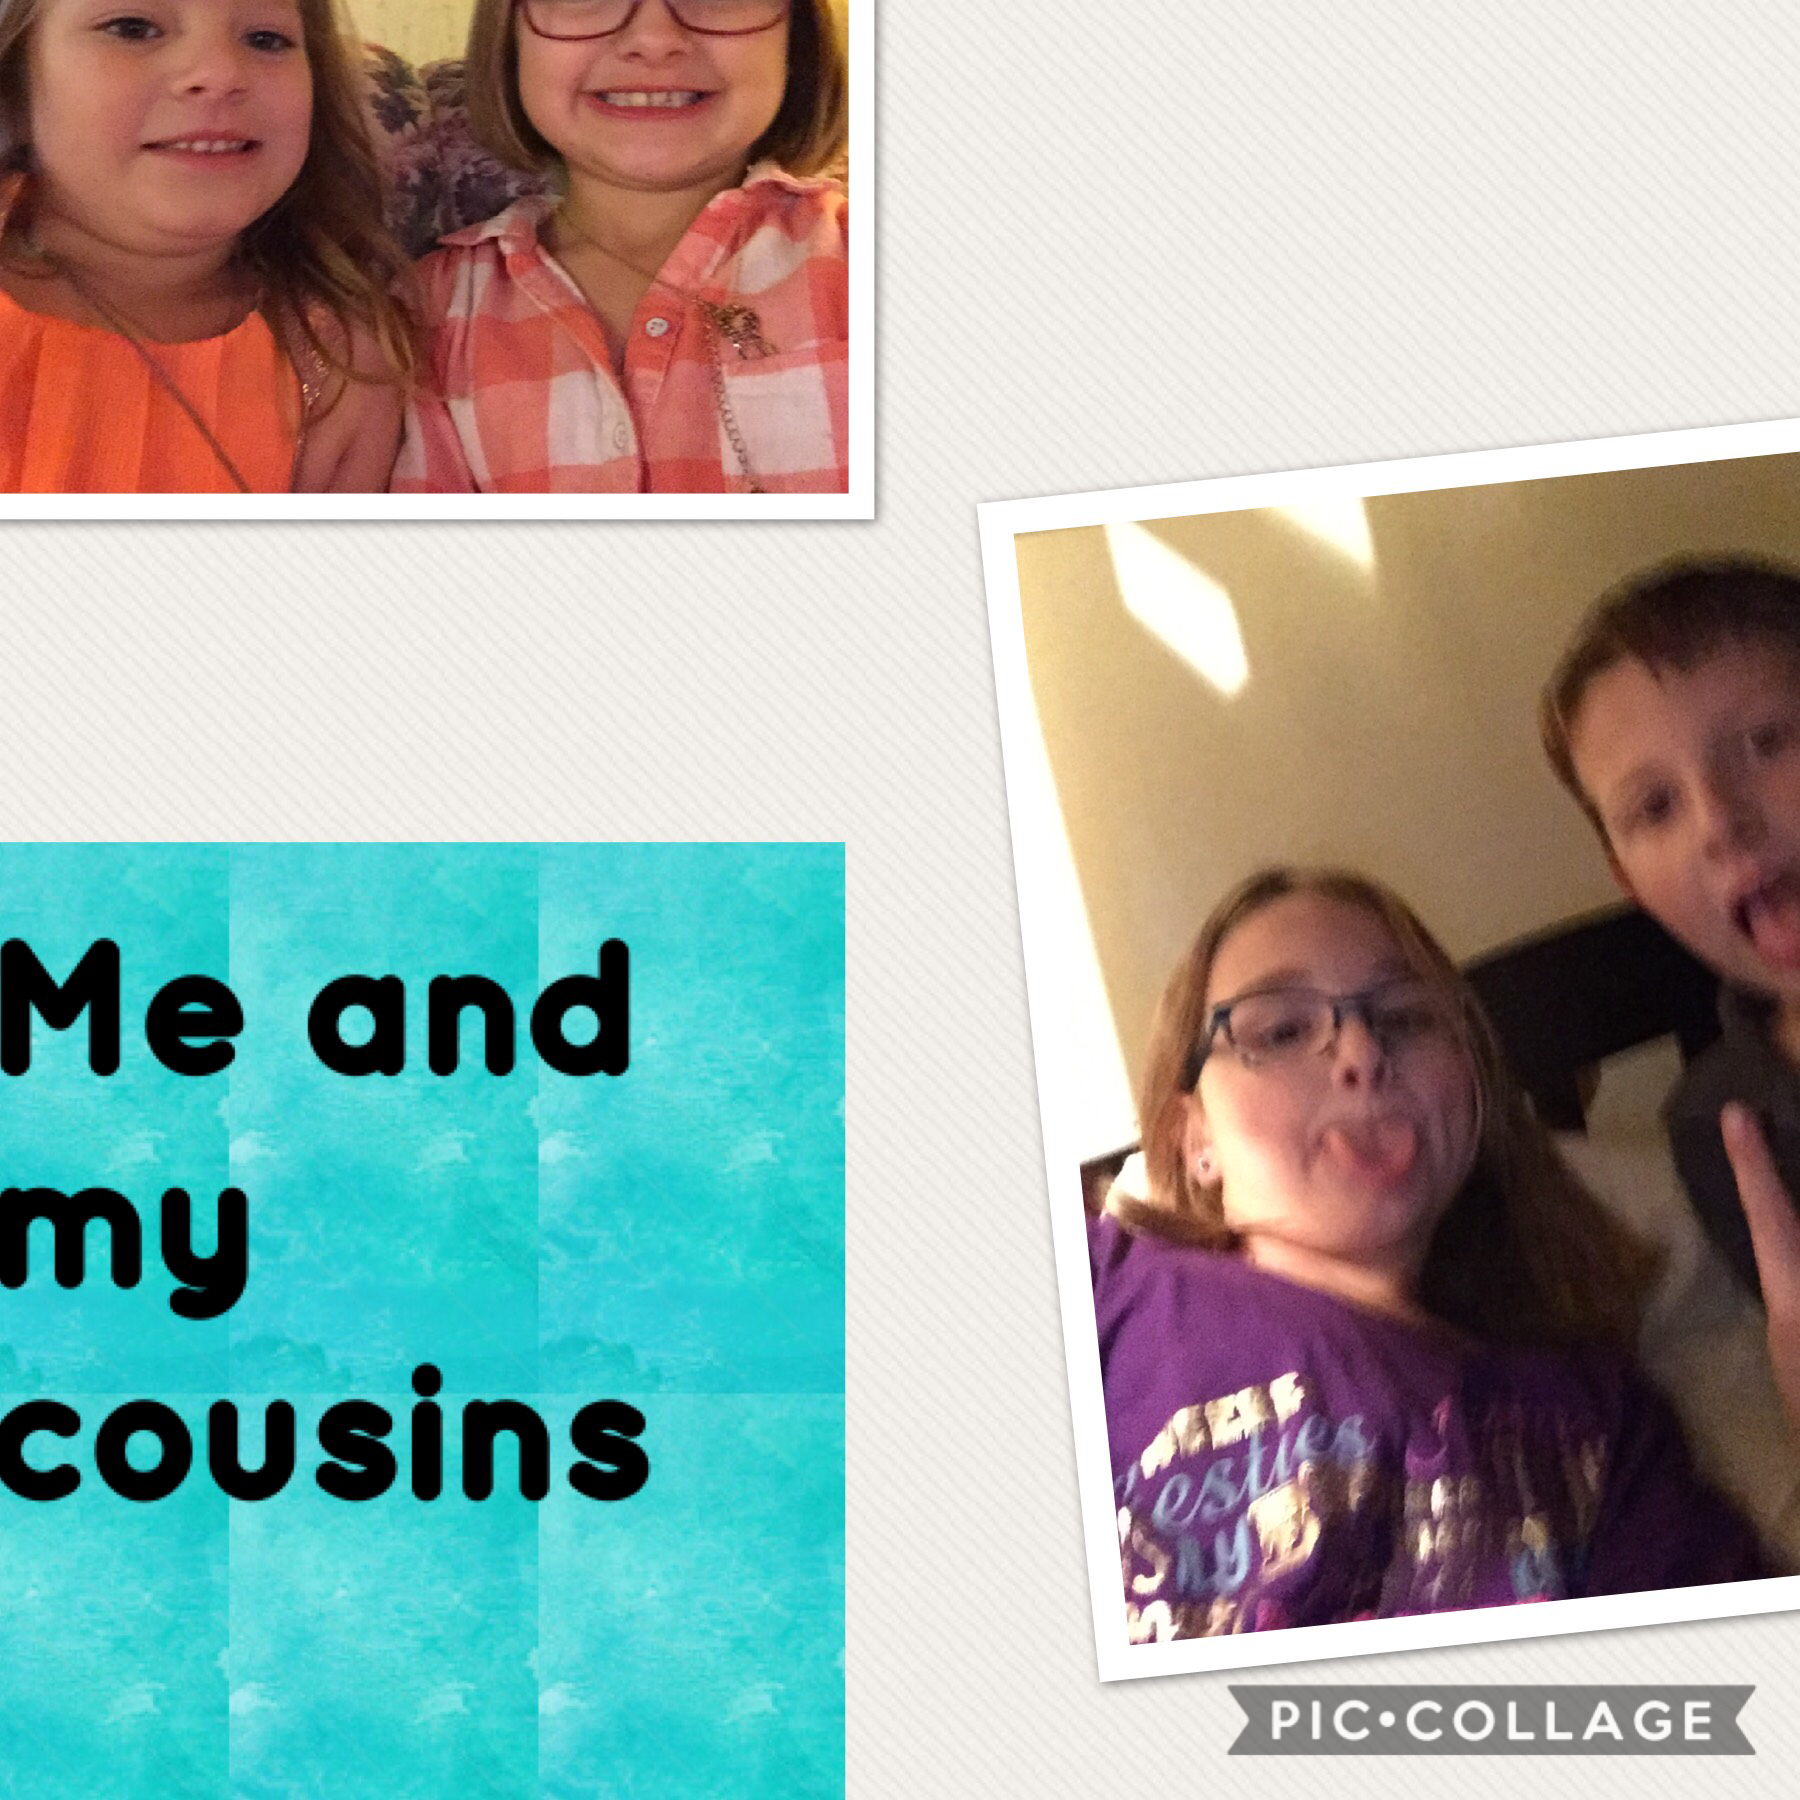 This is me and my cousins